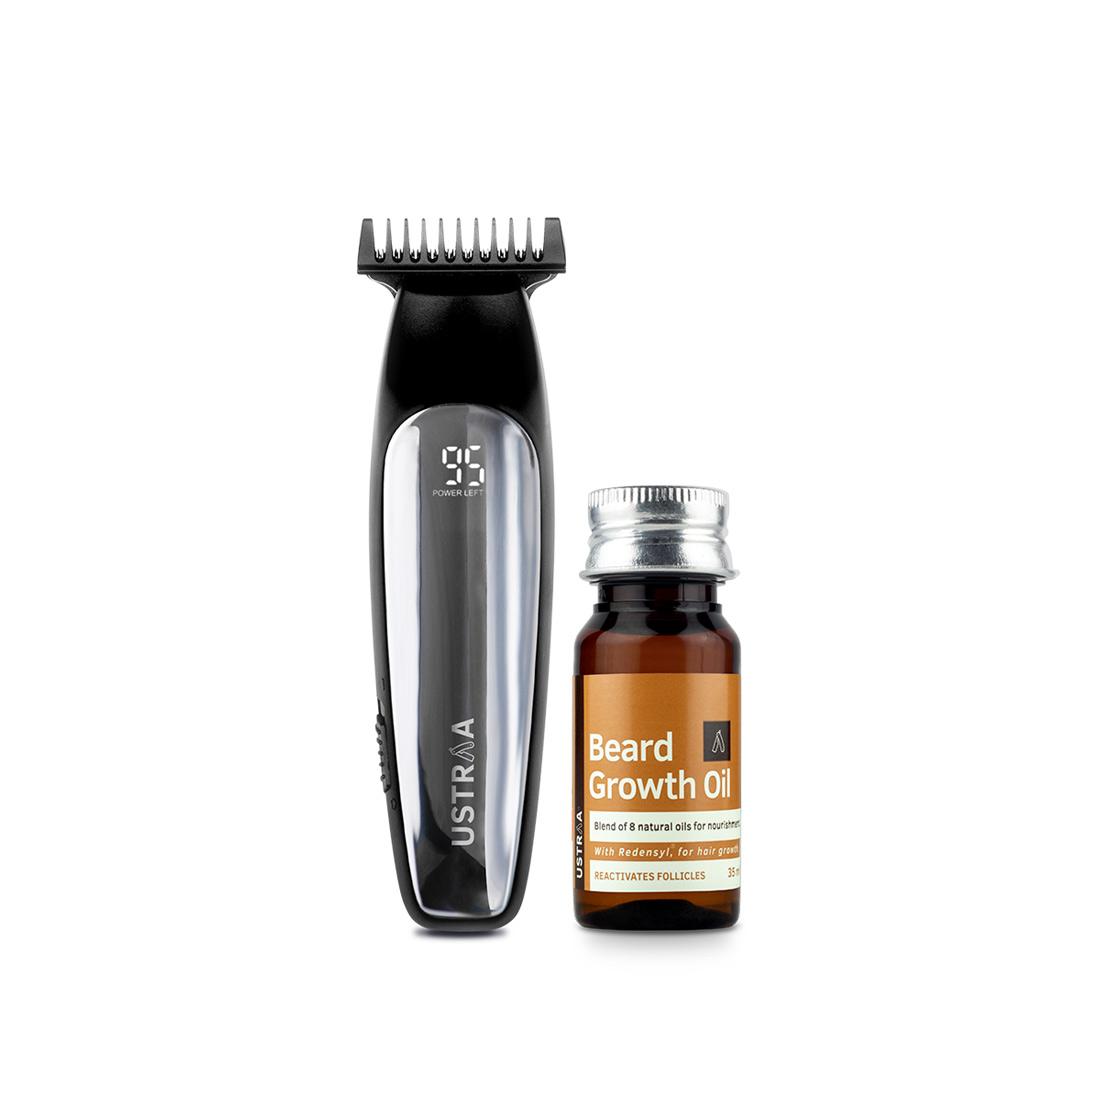 Buy Beard Growth & Grooming Kit - With Cordless Lithium Powered Beard Trimmer & Best Beard Growth Oil